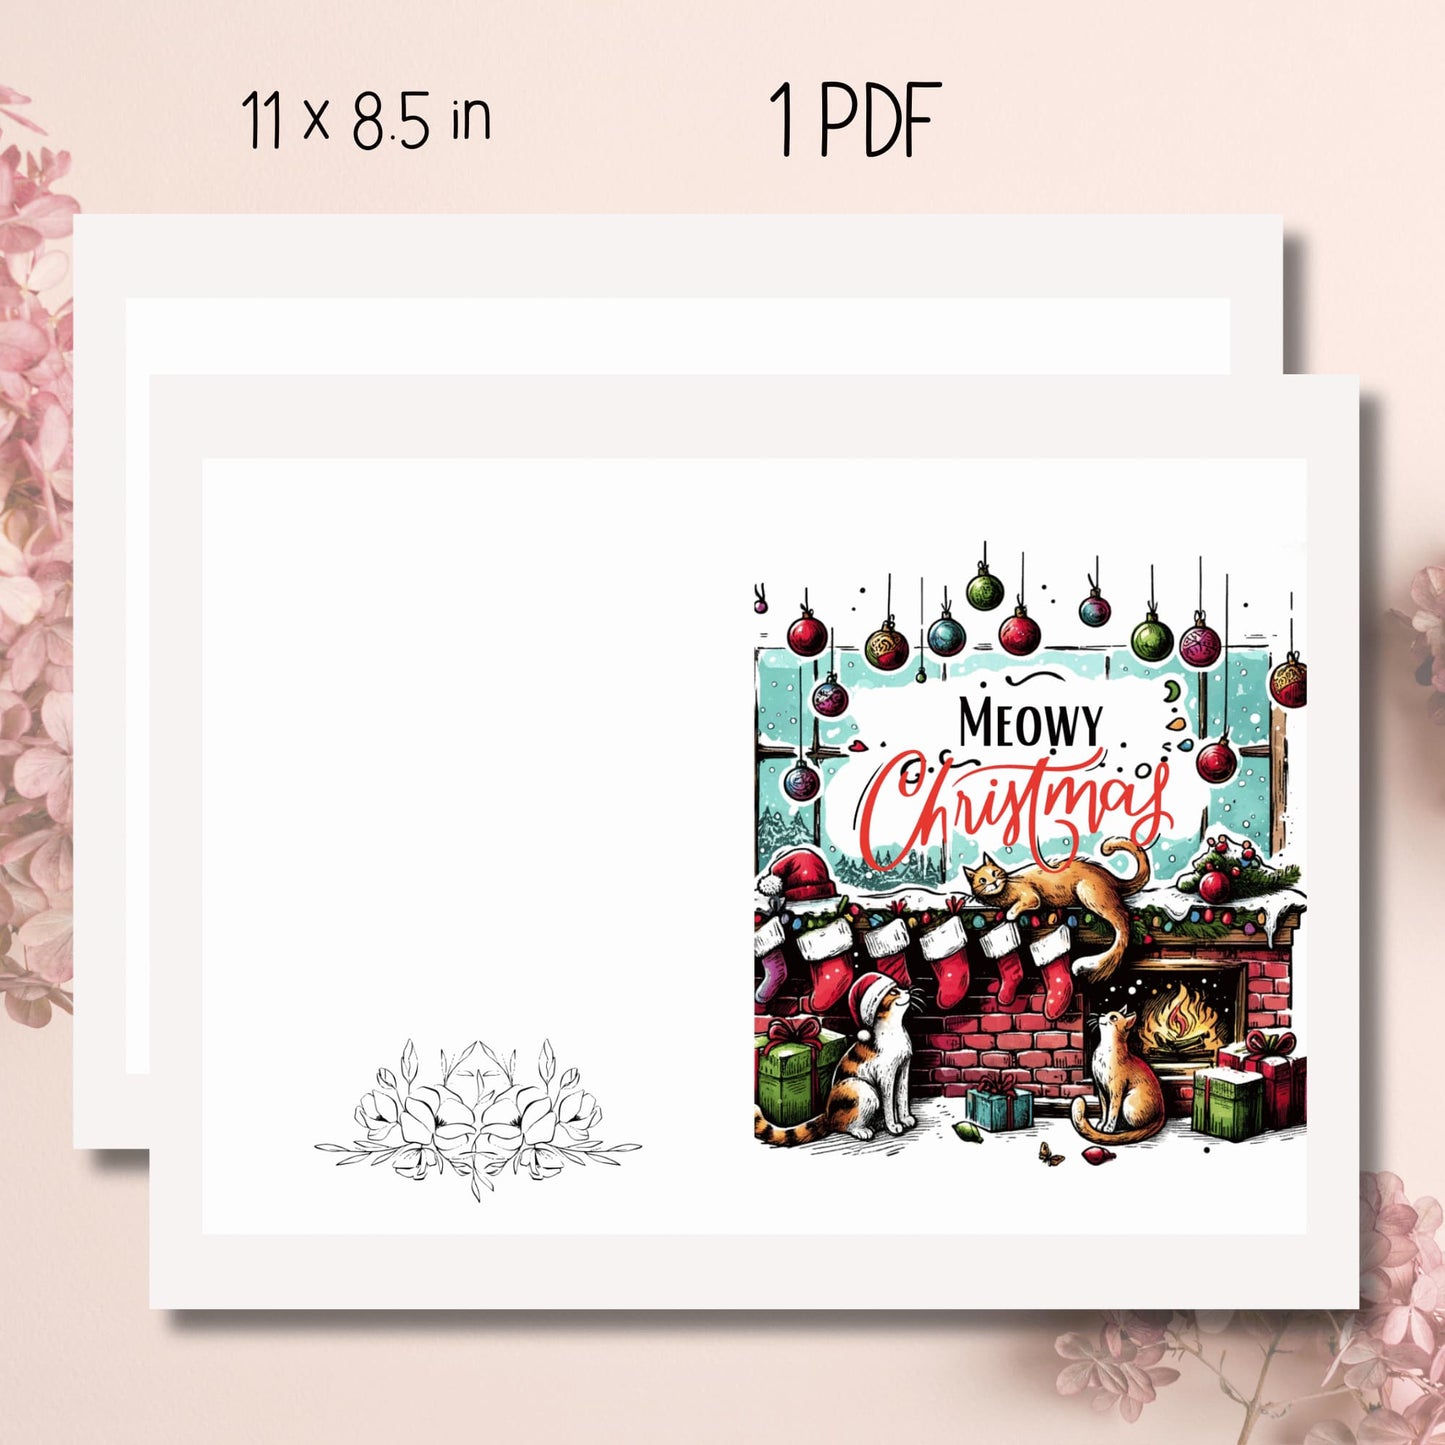 An 11x8.5 inch print-ready sheet of the Free Printable Christmas Card for 2023, featuring a beautifully designed festive template, ready for personal customization and holiday greetings.